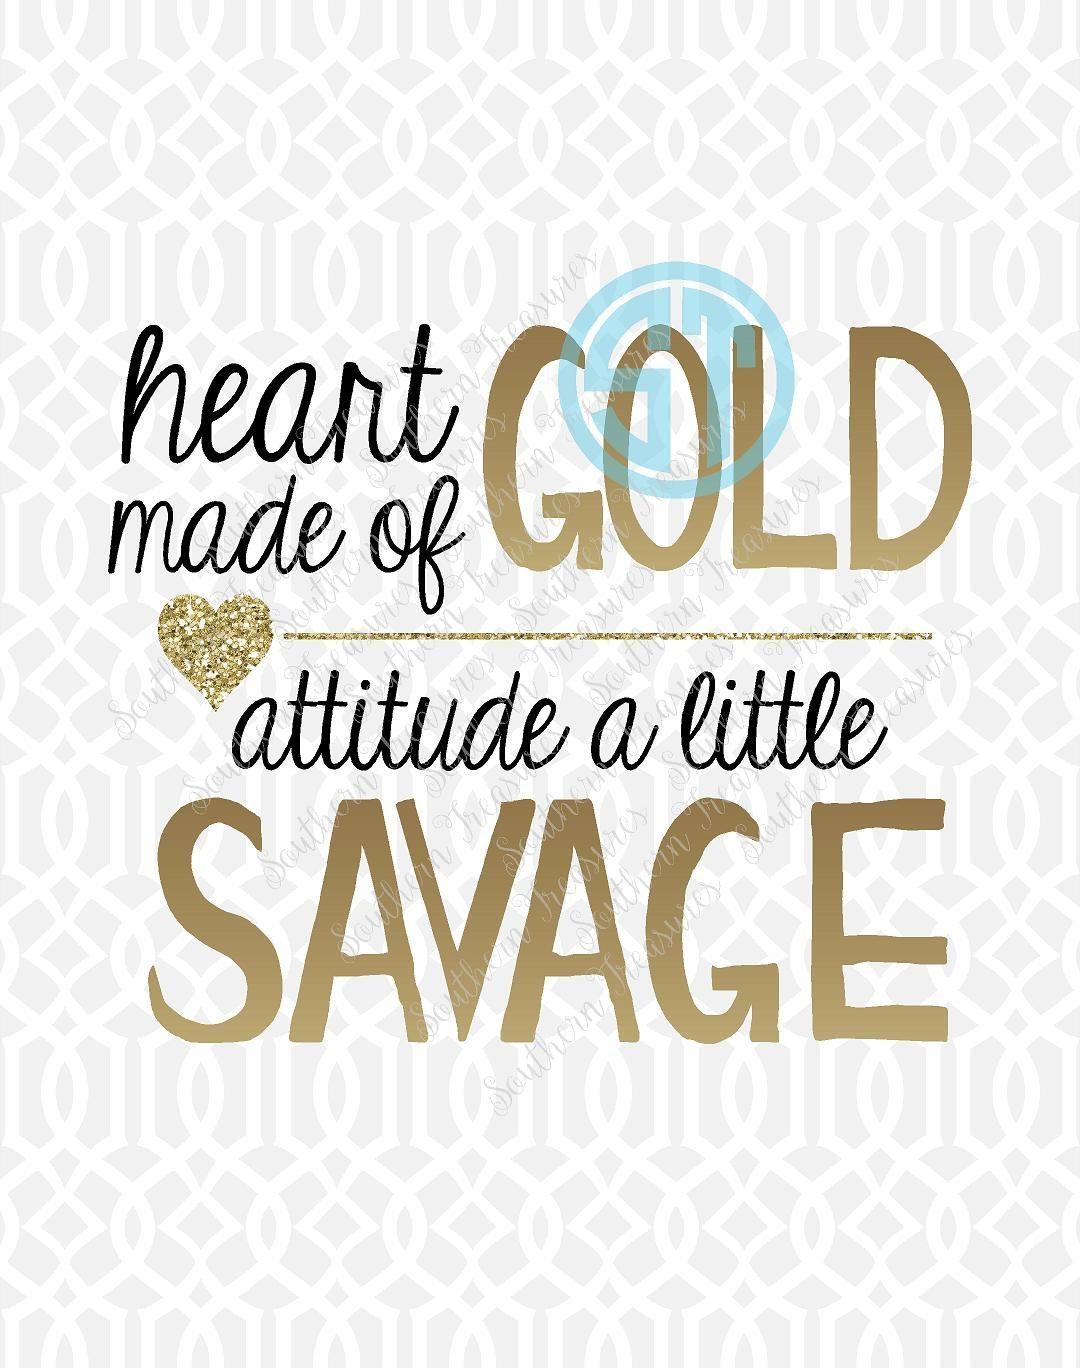 Little Savage Logo - Heart Made of Gold Attitude a Little Savage - Southern Treasures ...